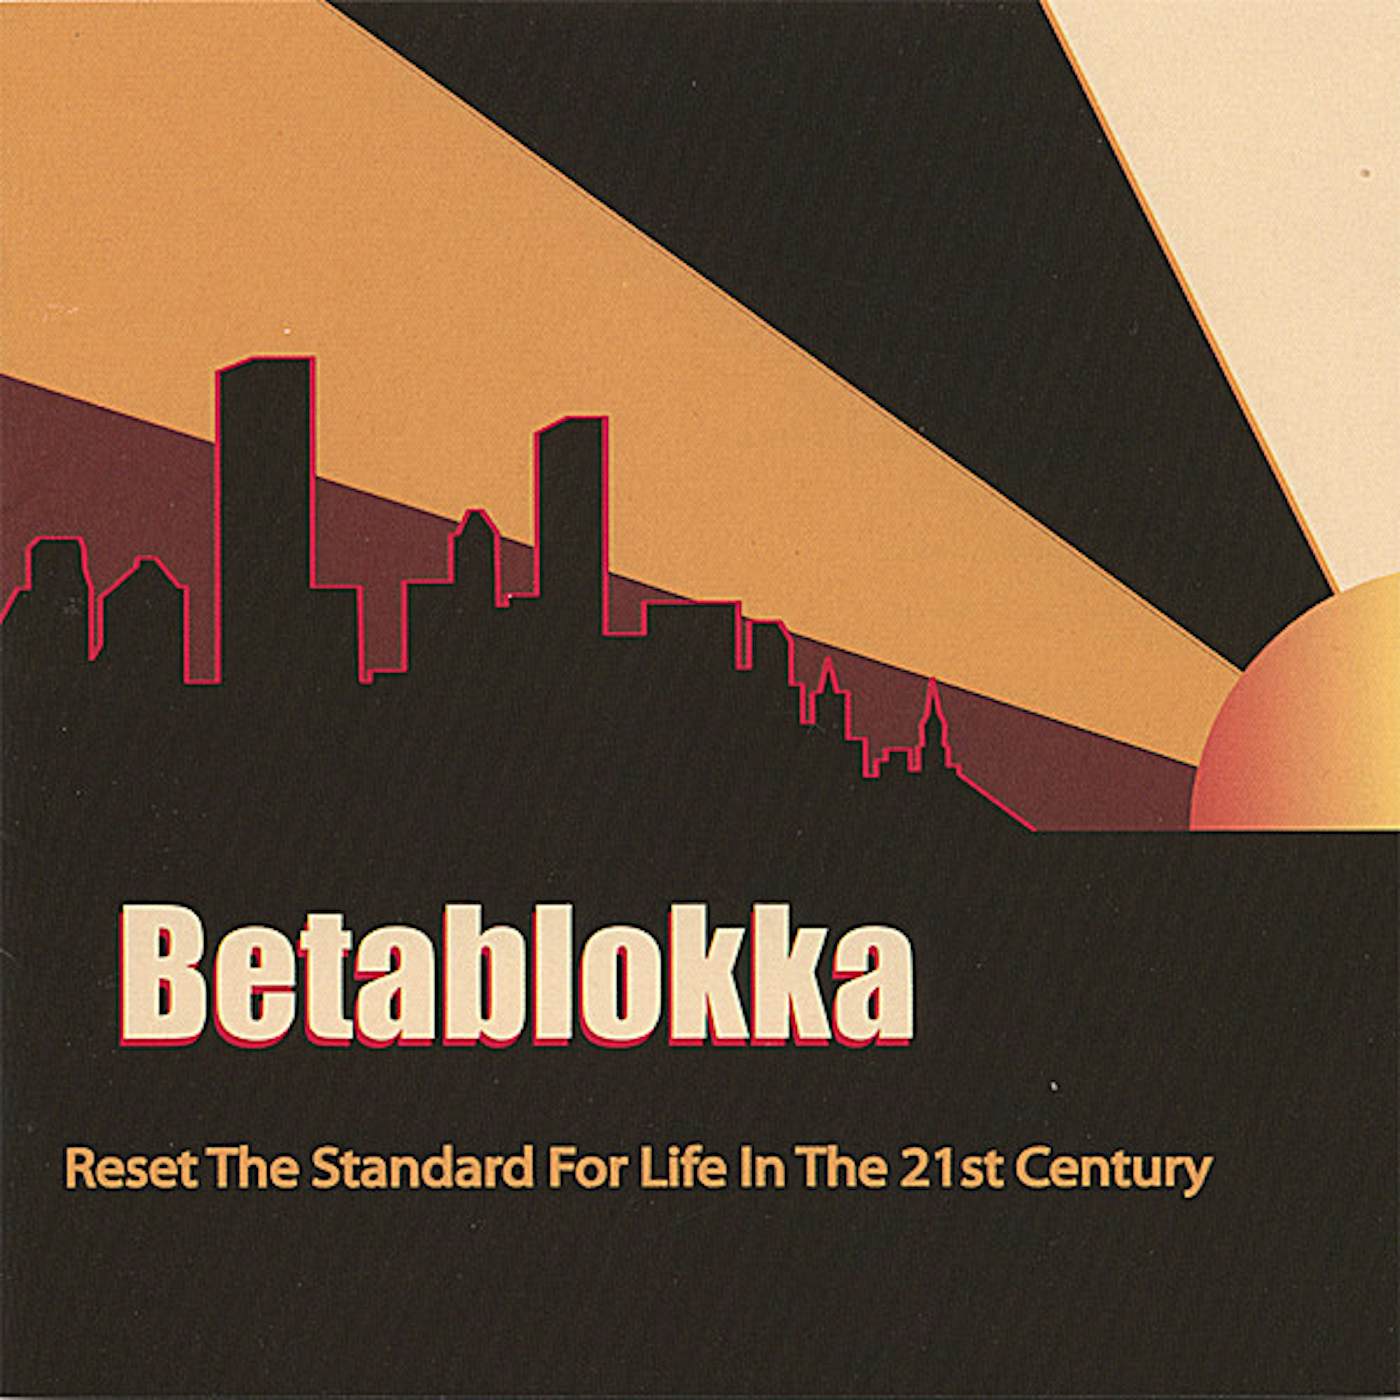 Betablokka RESET THE STANDARD FOR LIFE IN THE 21ST CENTURY CD